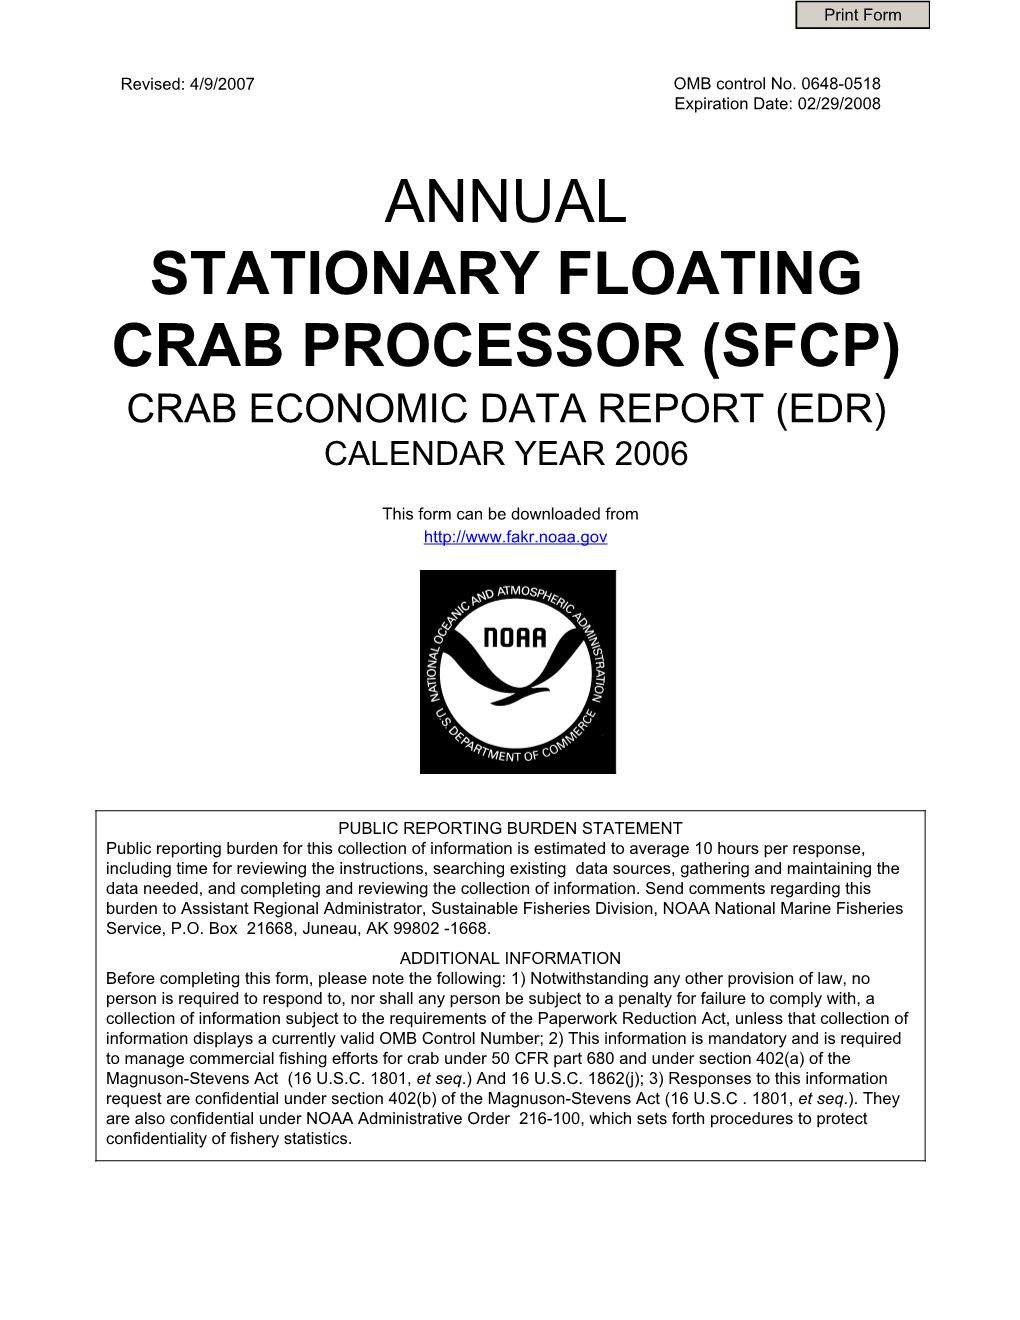 2006 Annual Stationary Floating Processor